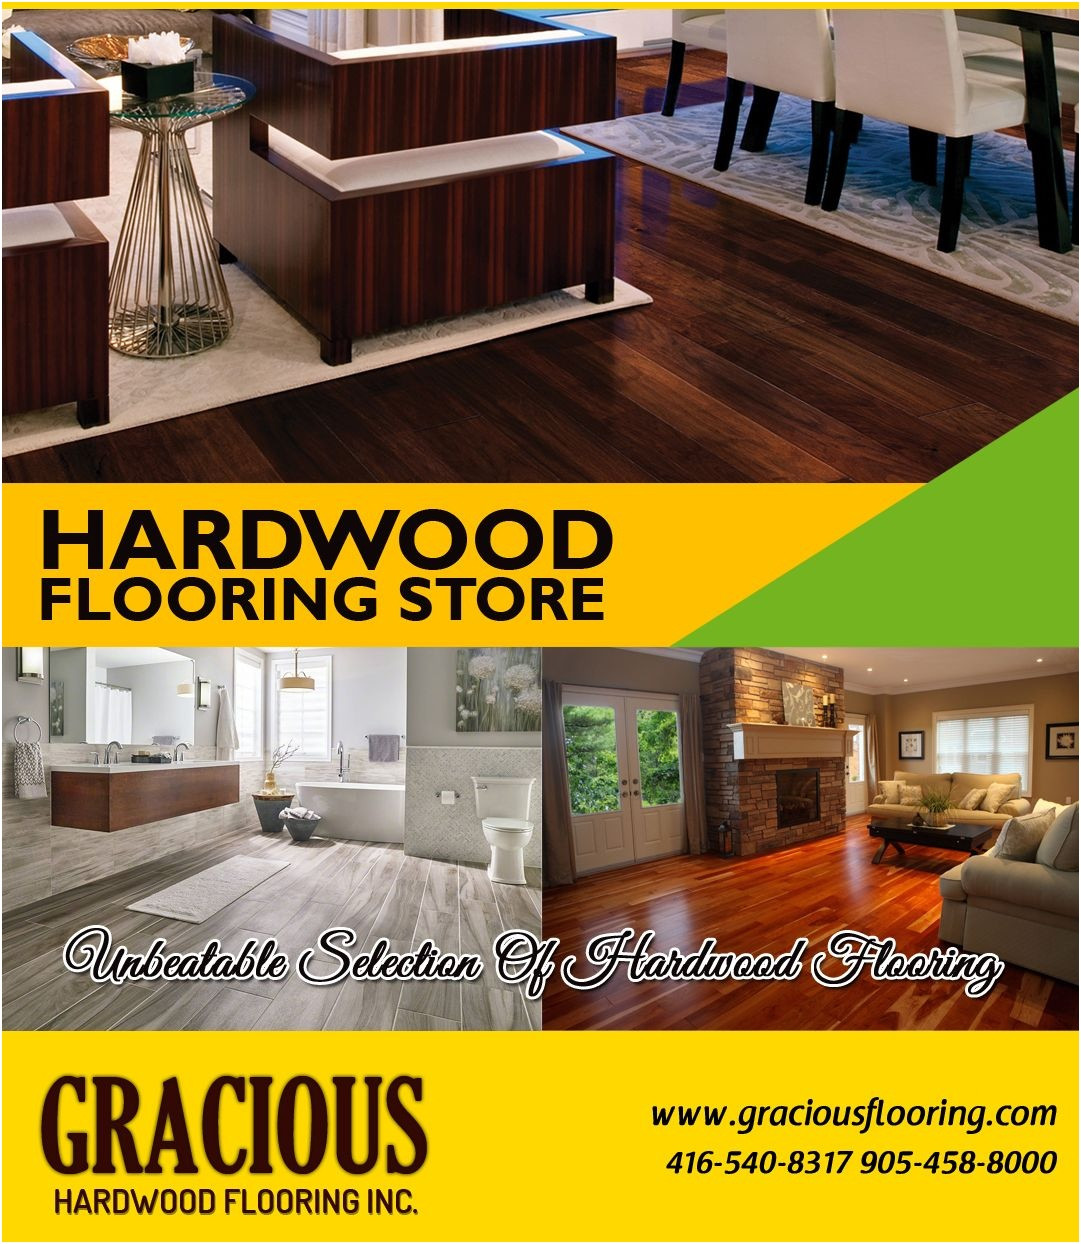 15 Recommended High End Hardwood Flooring Company 2024 free download high end hardwood flooring company of wood flooring companies near me stock hardwood flooring stores near pertaining to related post